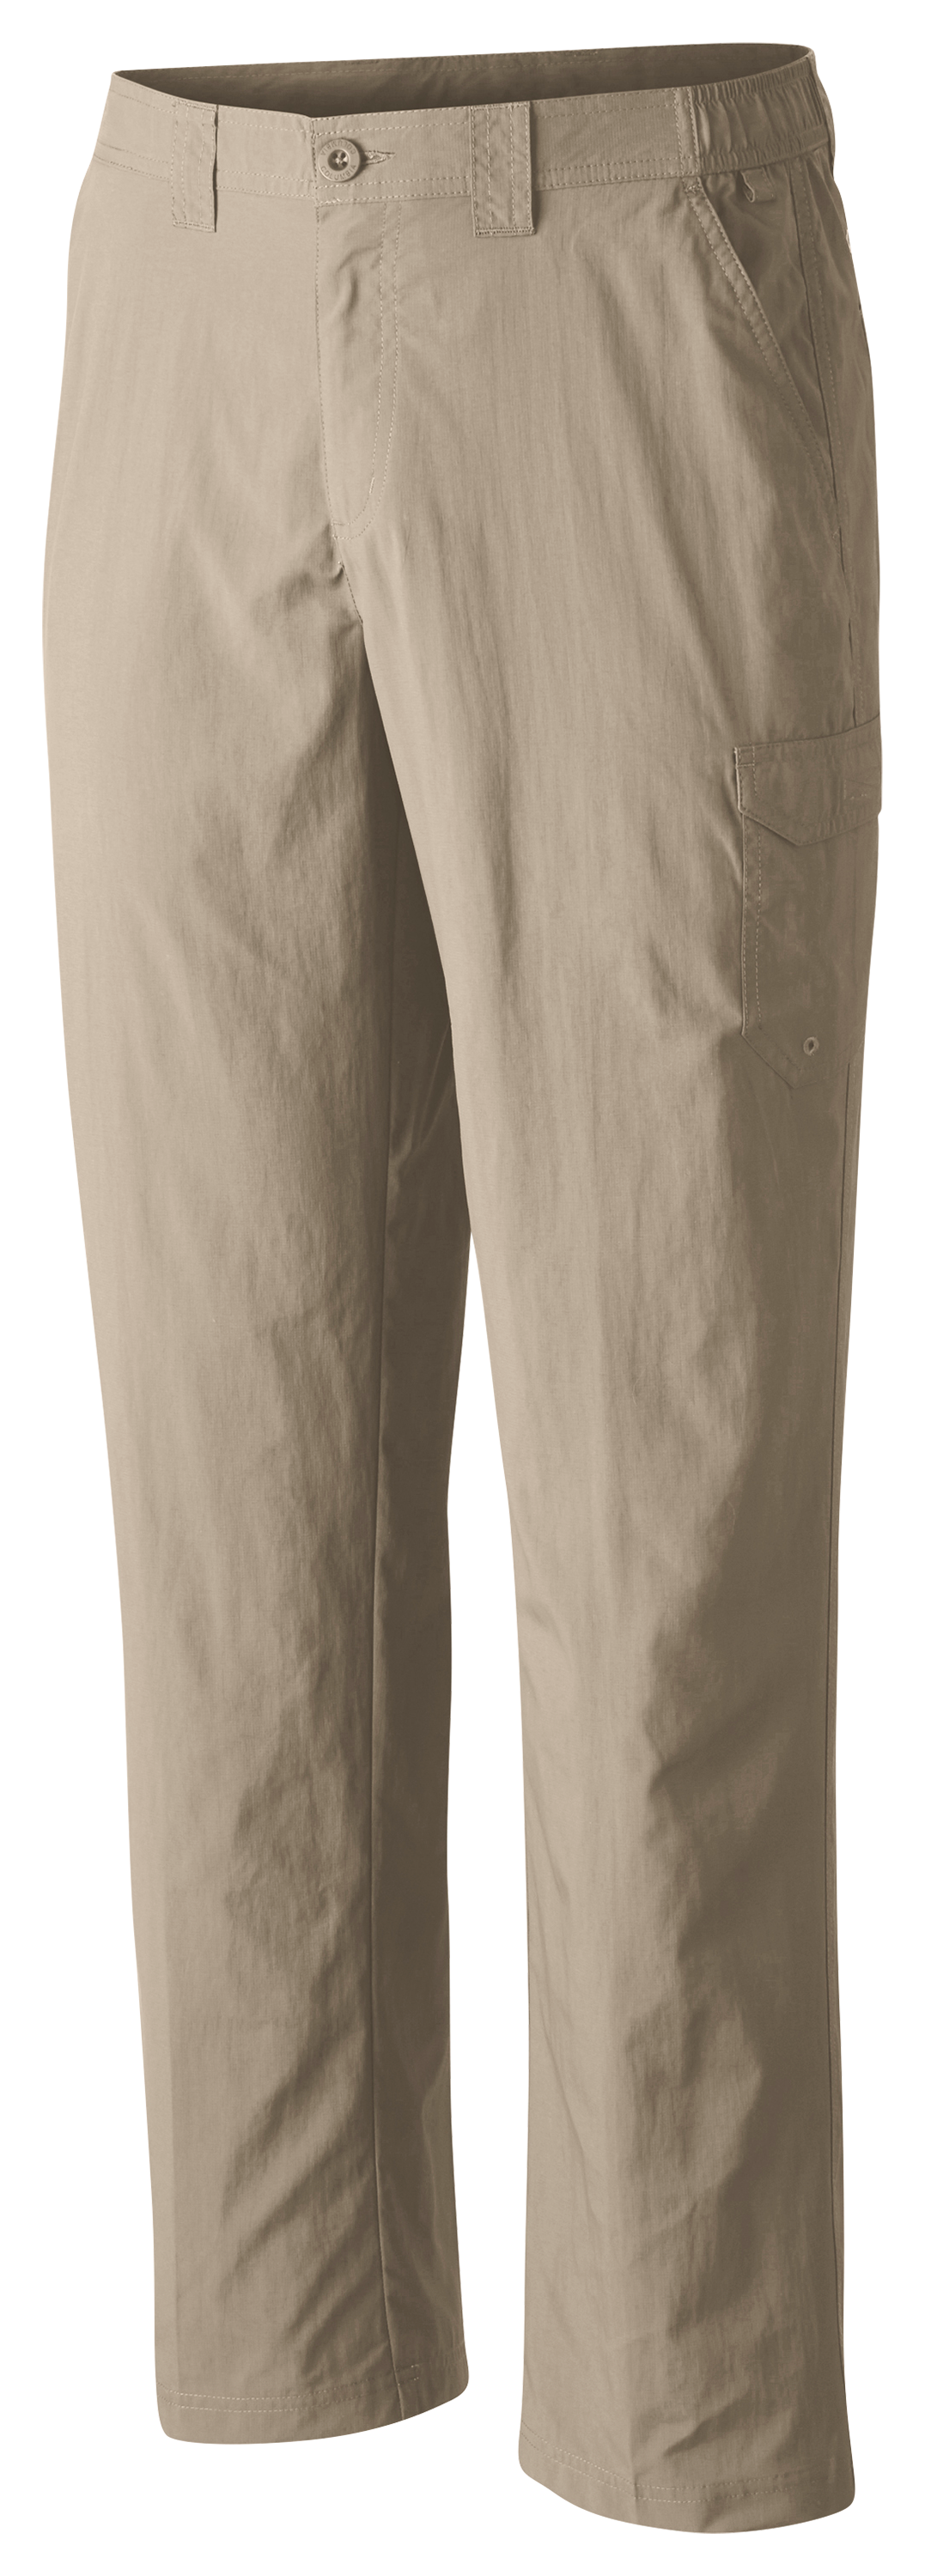 Columbia PFG Blood and Guts Pants for Men